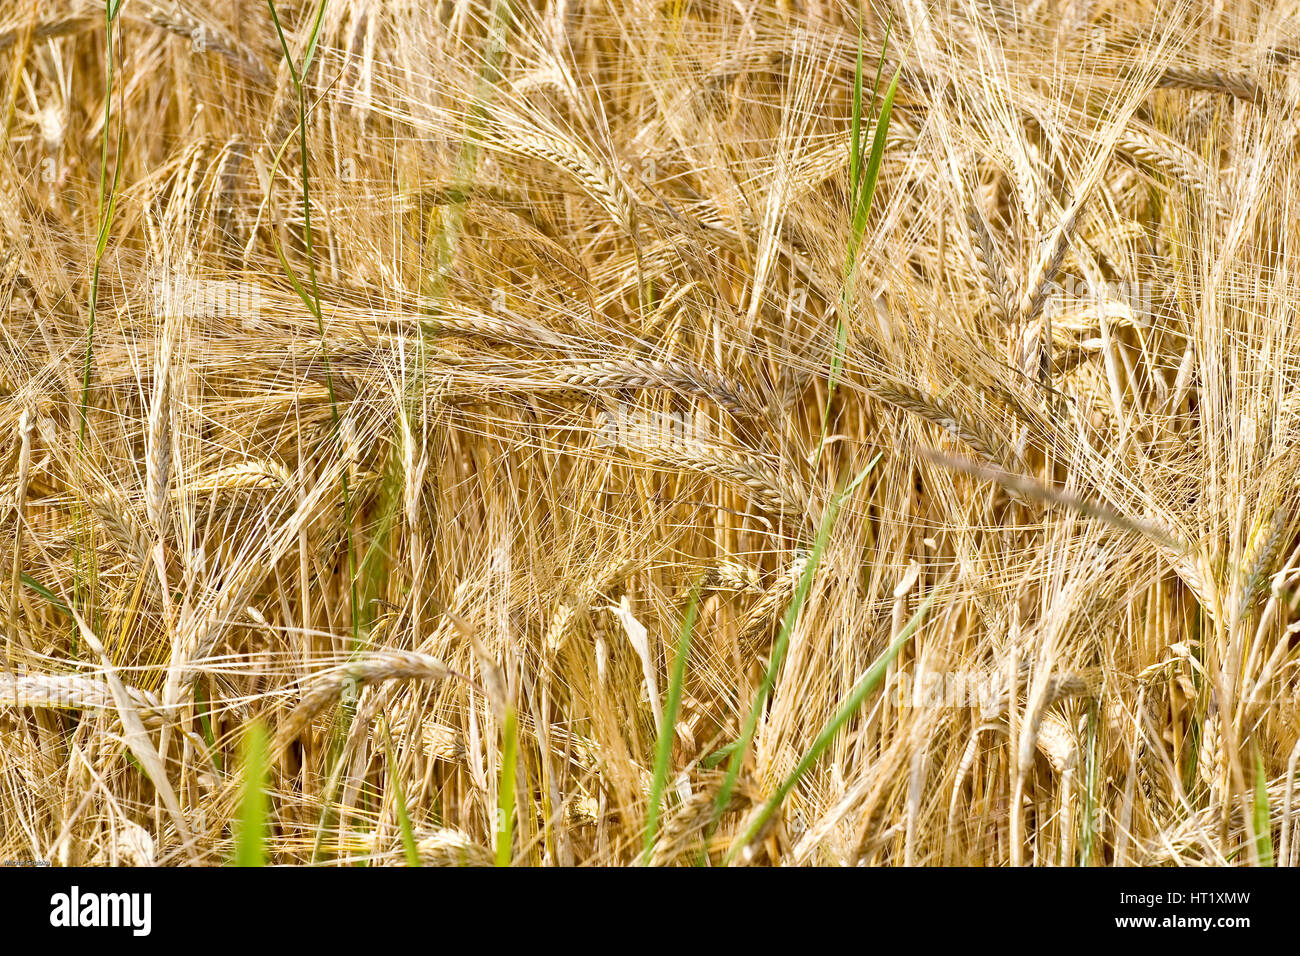 Field with Wheat Crop growing in Scotland Highlands, UK Stock Photo